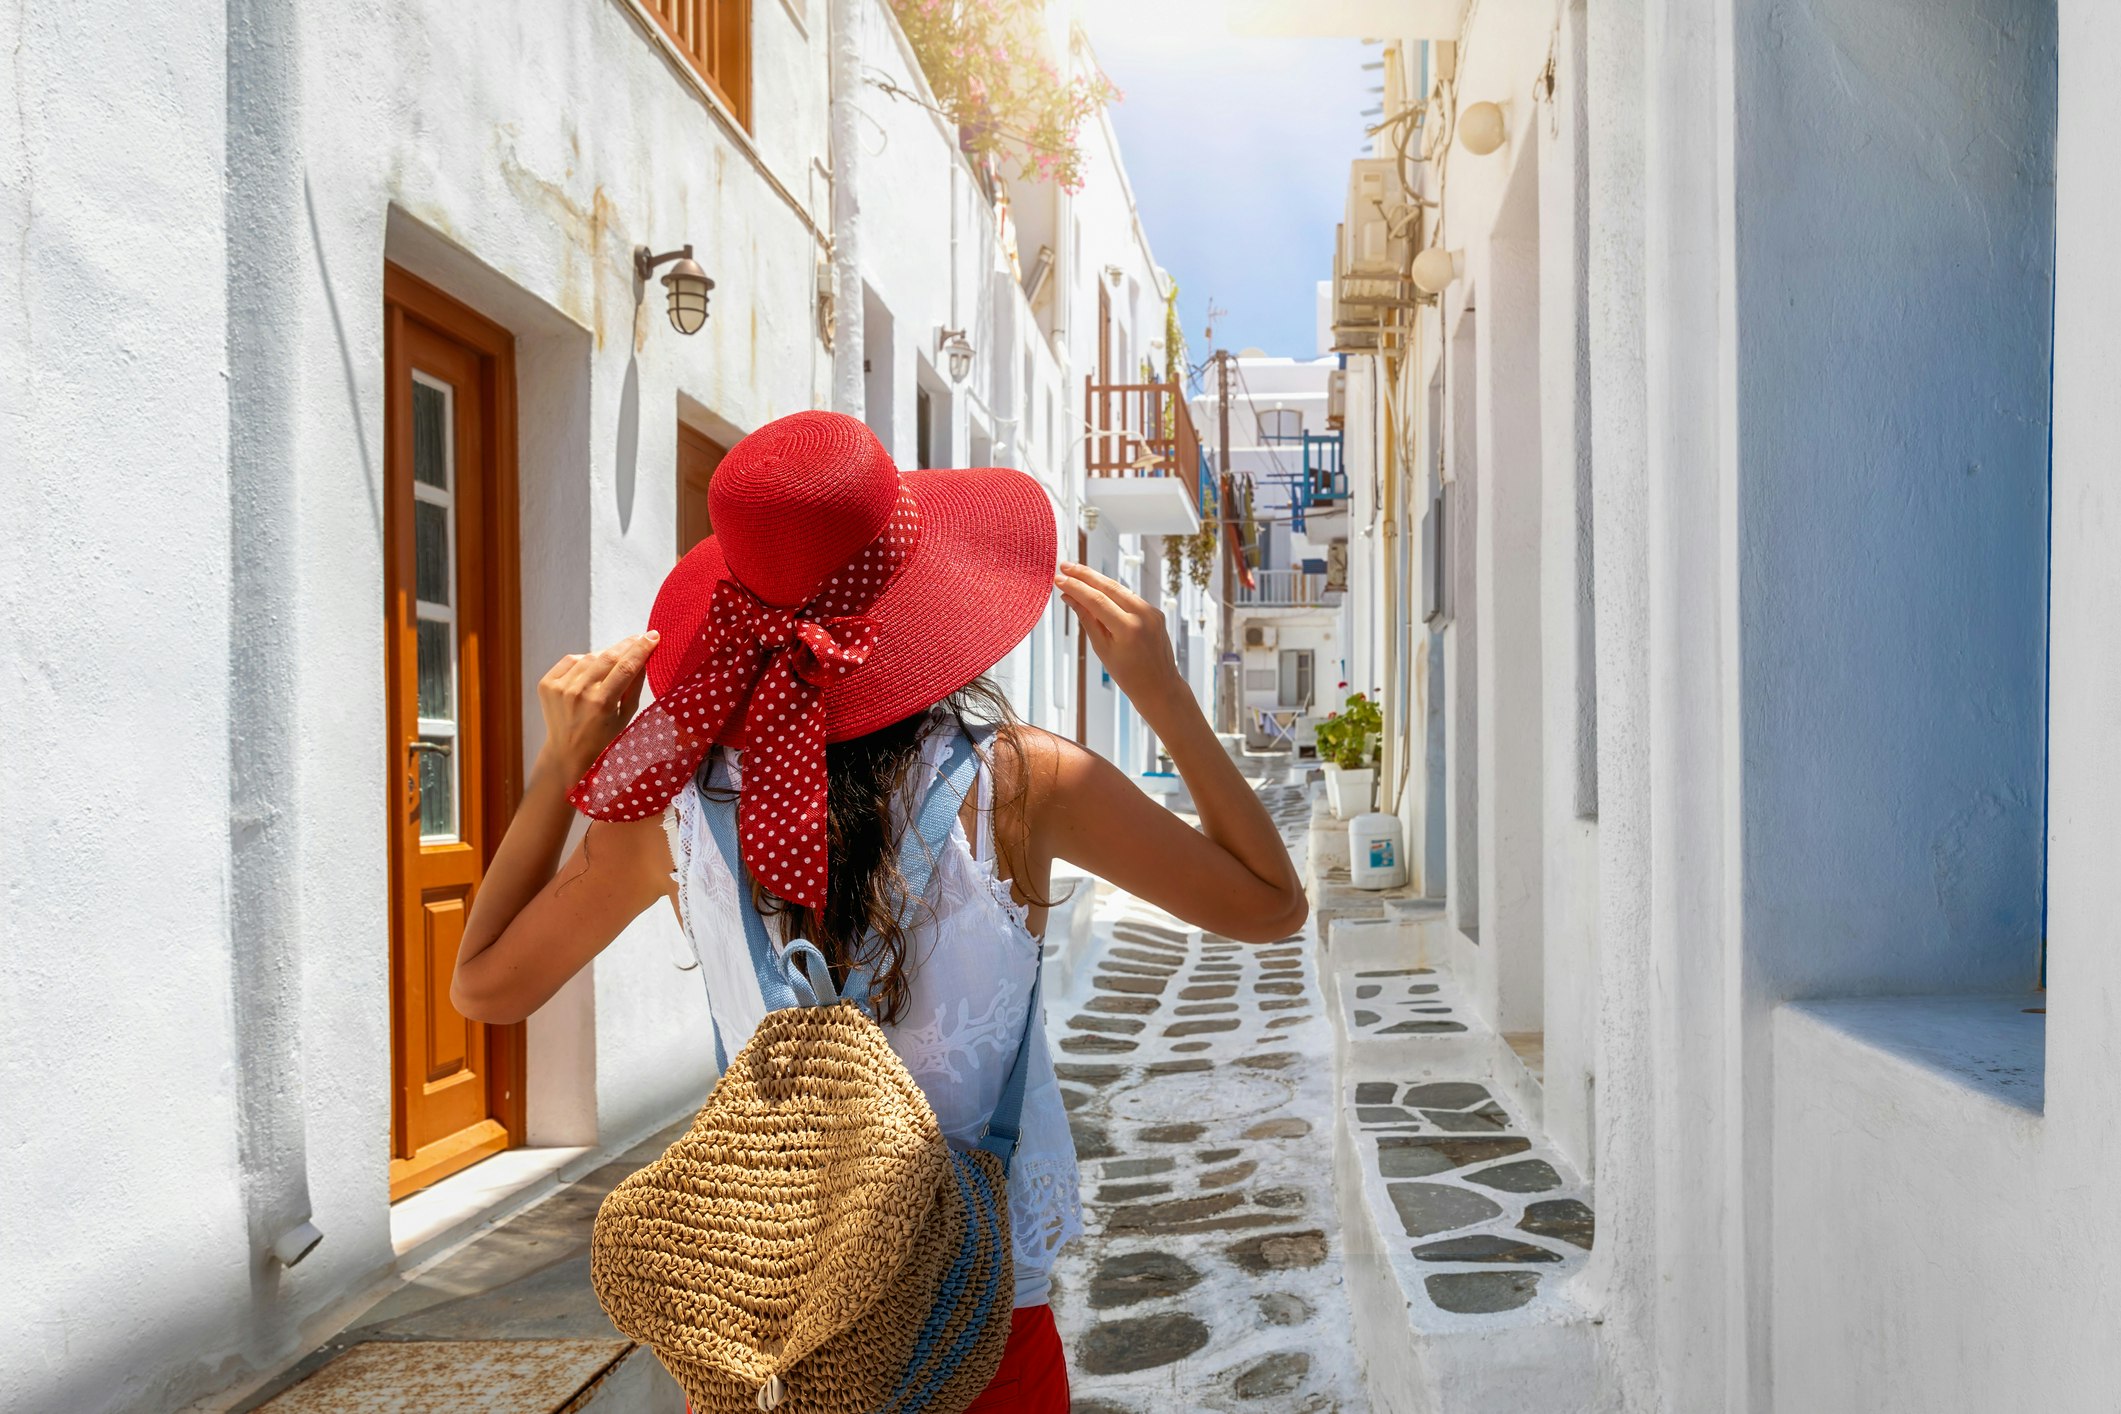 A woman wearing a large red sunhat walks through the alleys of Hora town, Mykonos